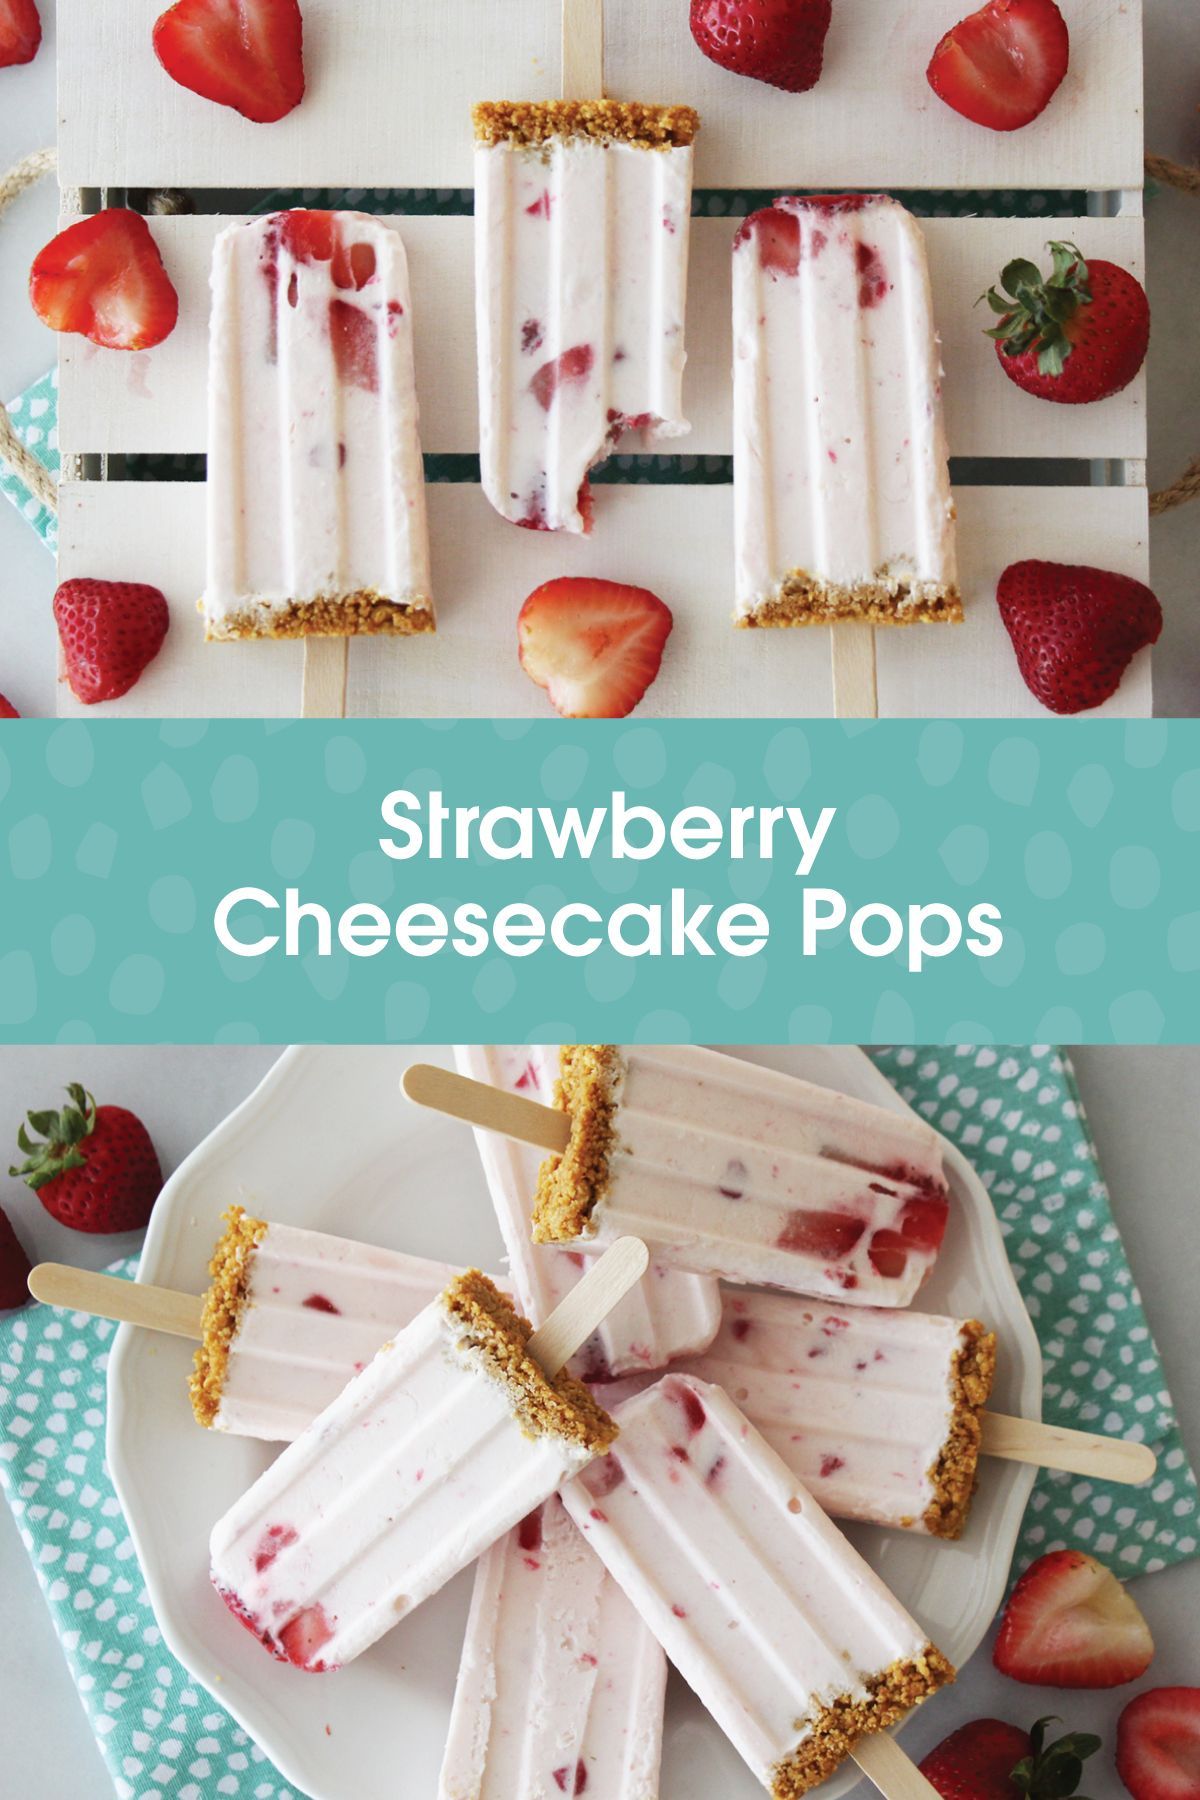 Strawberry Cheesecake Fro-Yo Pops are everything. To make, mix 4 containers of…